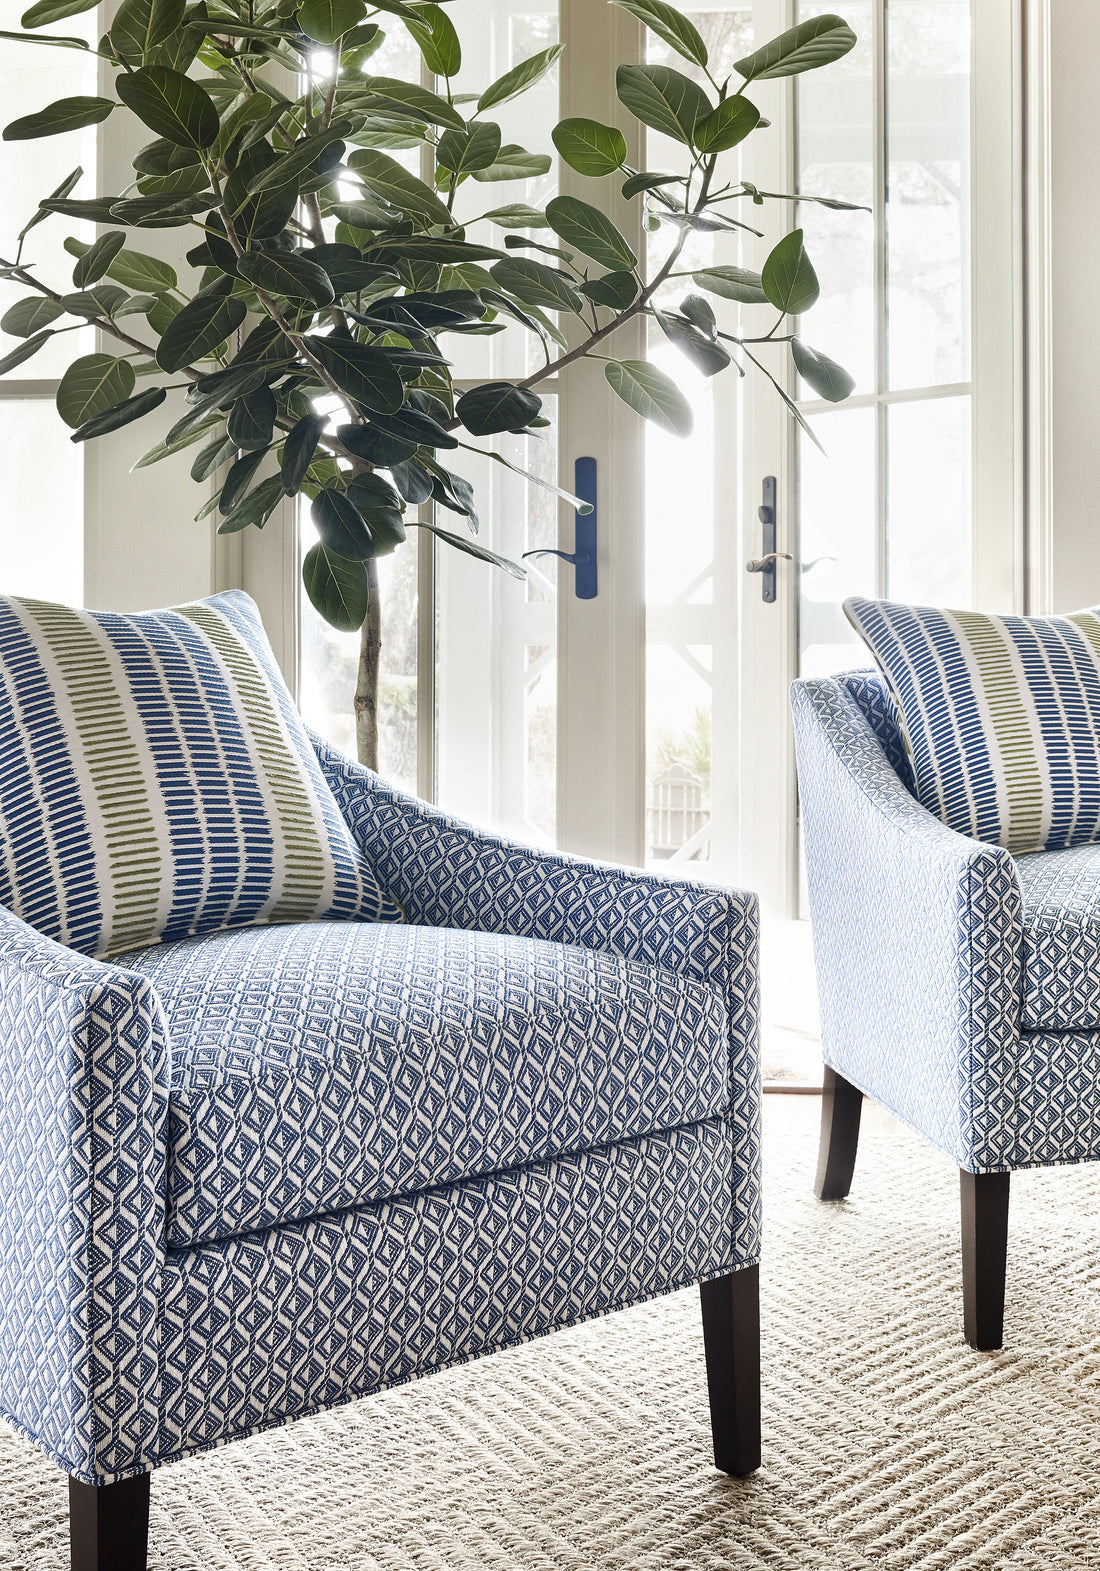 Stain resistant Grayson Chairs in Trion woven fabric in royal blue color - pattern number W73456 by Thibaut in the Landmark collection